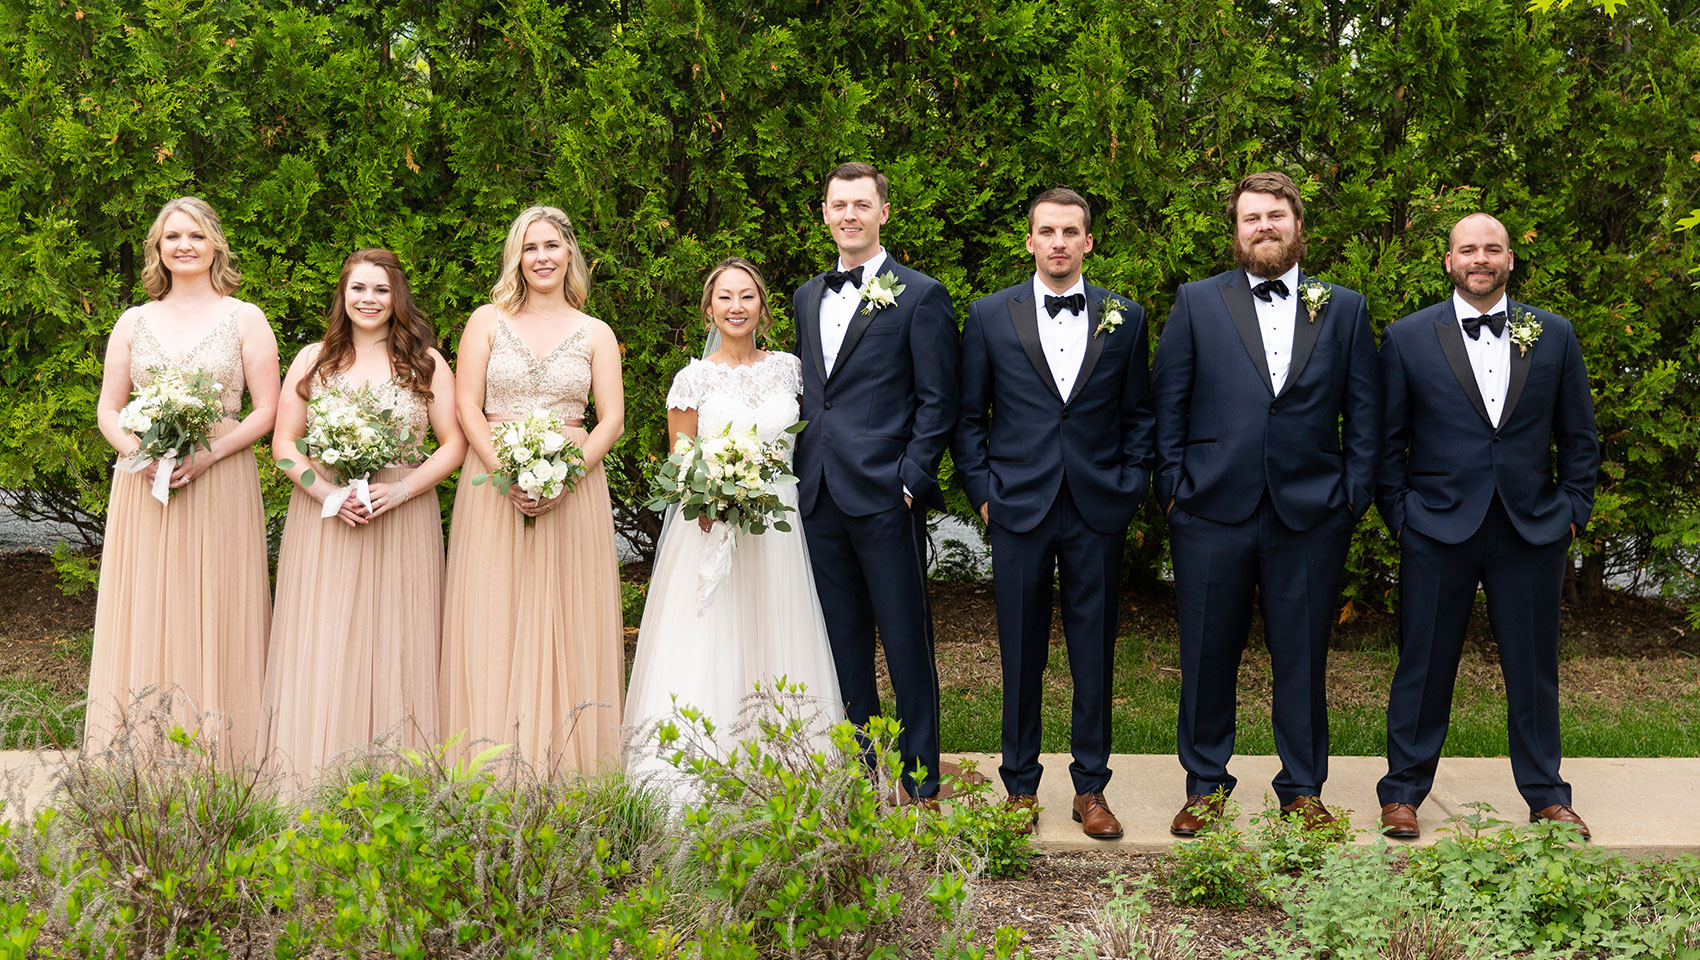 Bridal party and Groomsmen posing with bride and groom